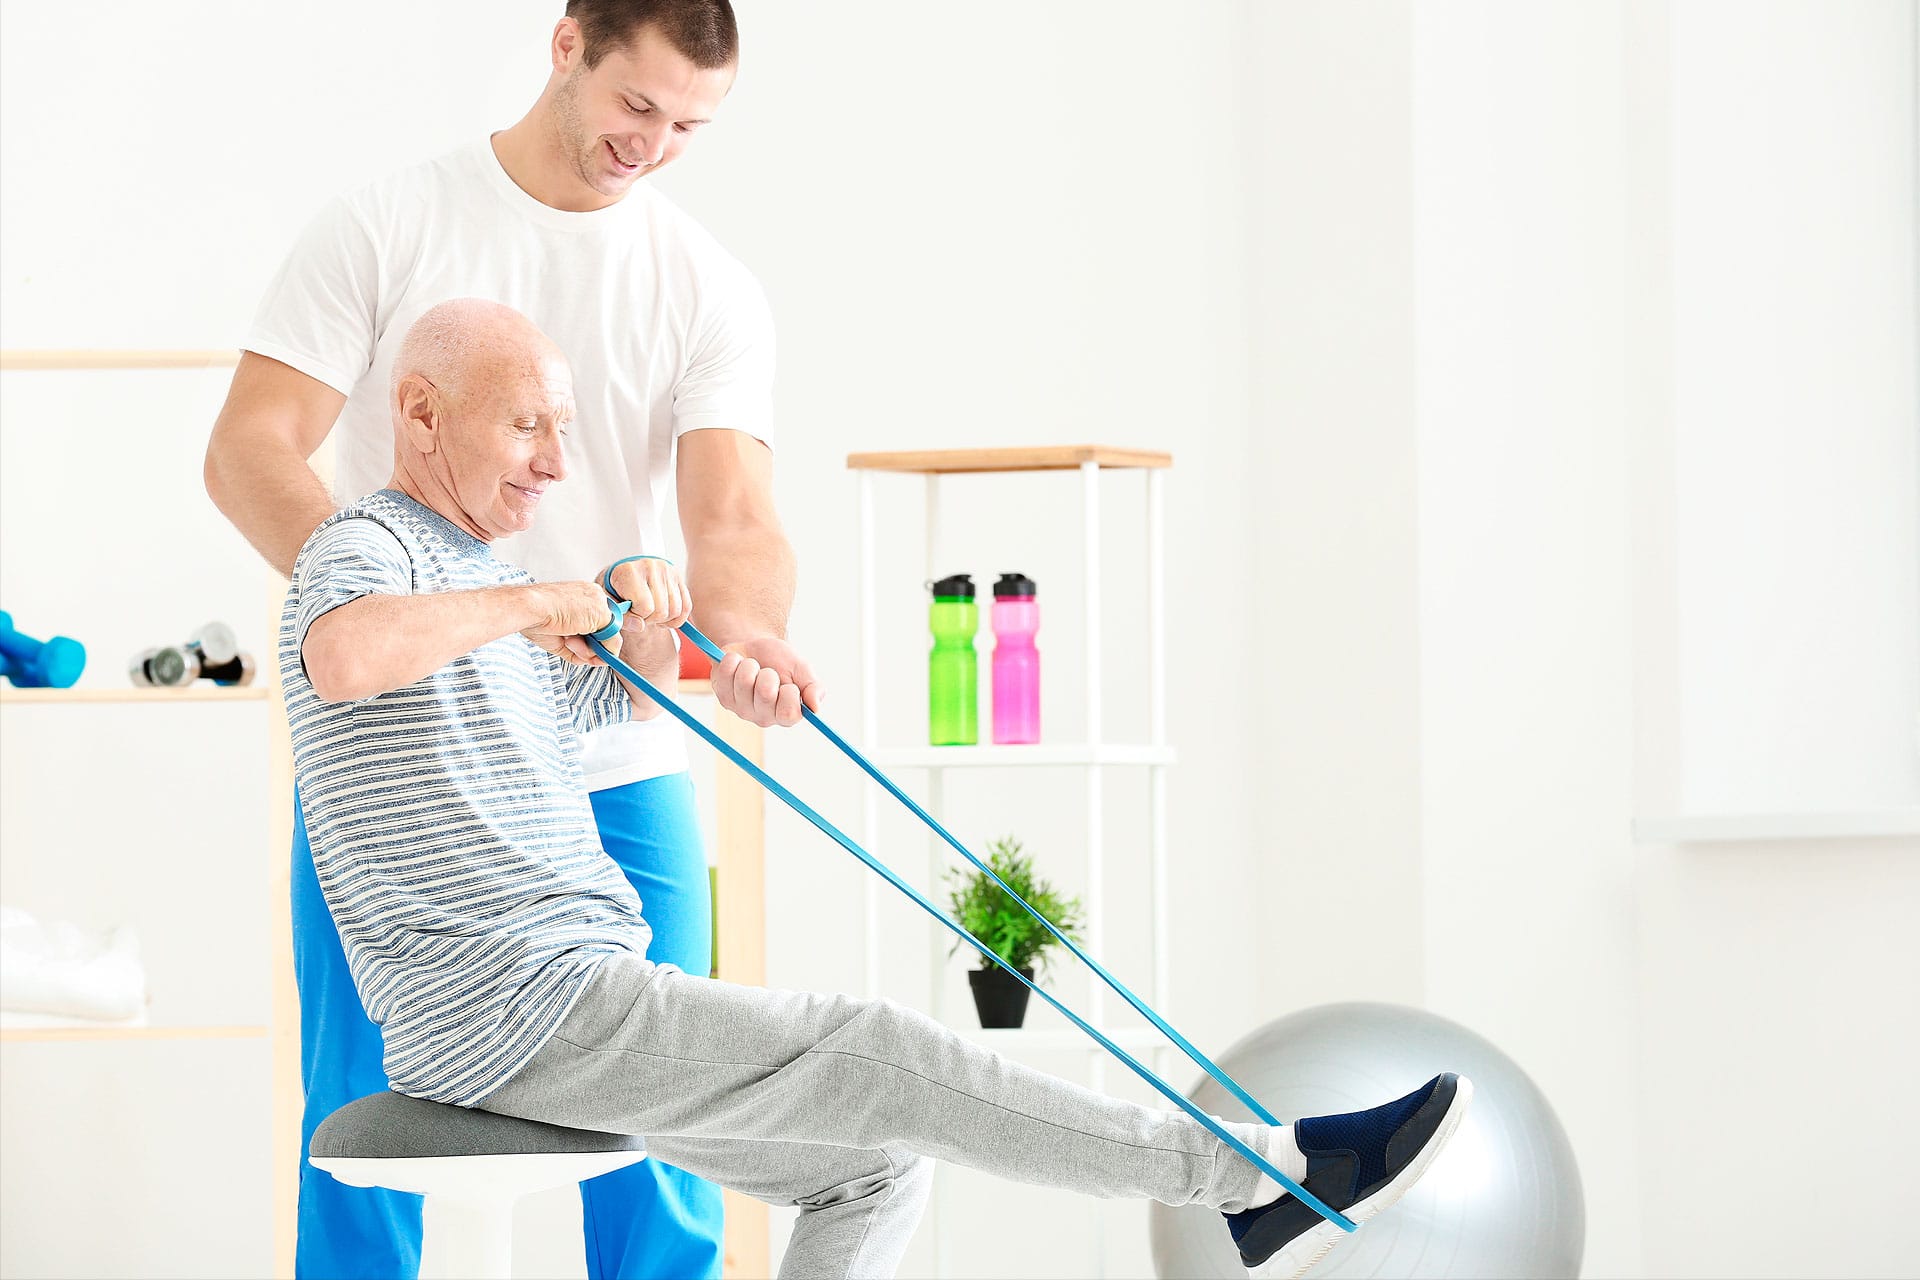 Revolutionizing Rehabilitation: Physical Therapy Rehabilitation Solutions Market Sees Rapid Growth